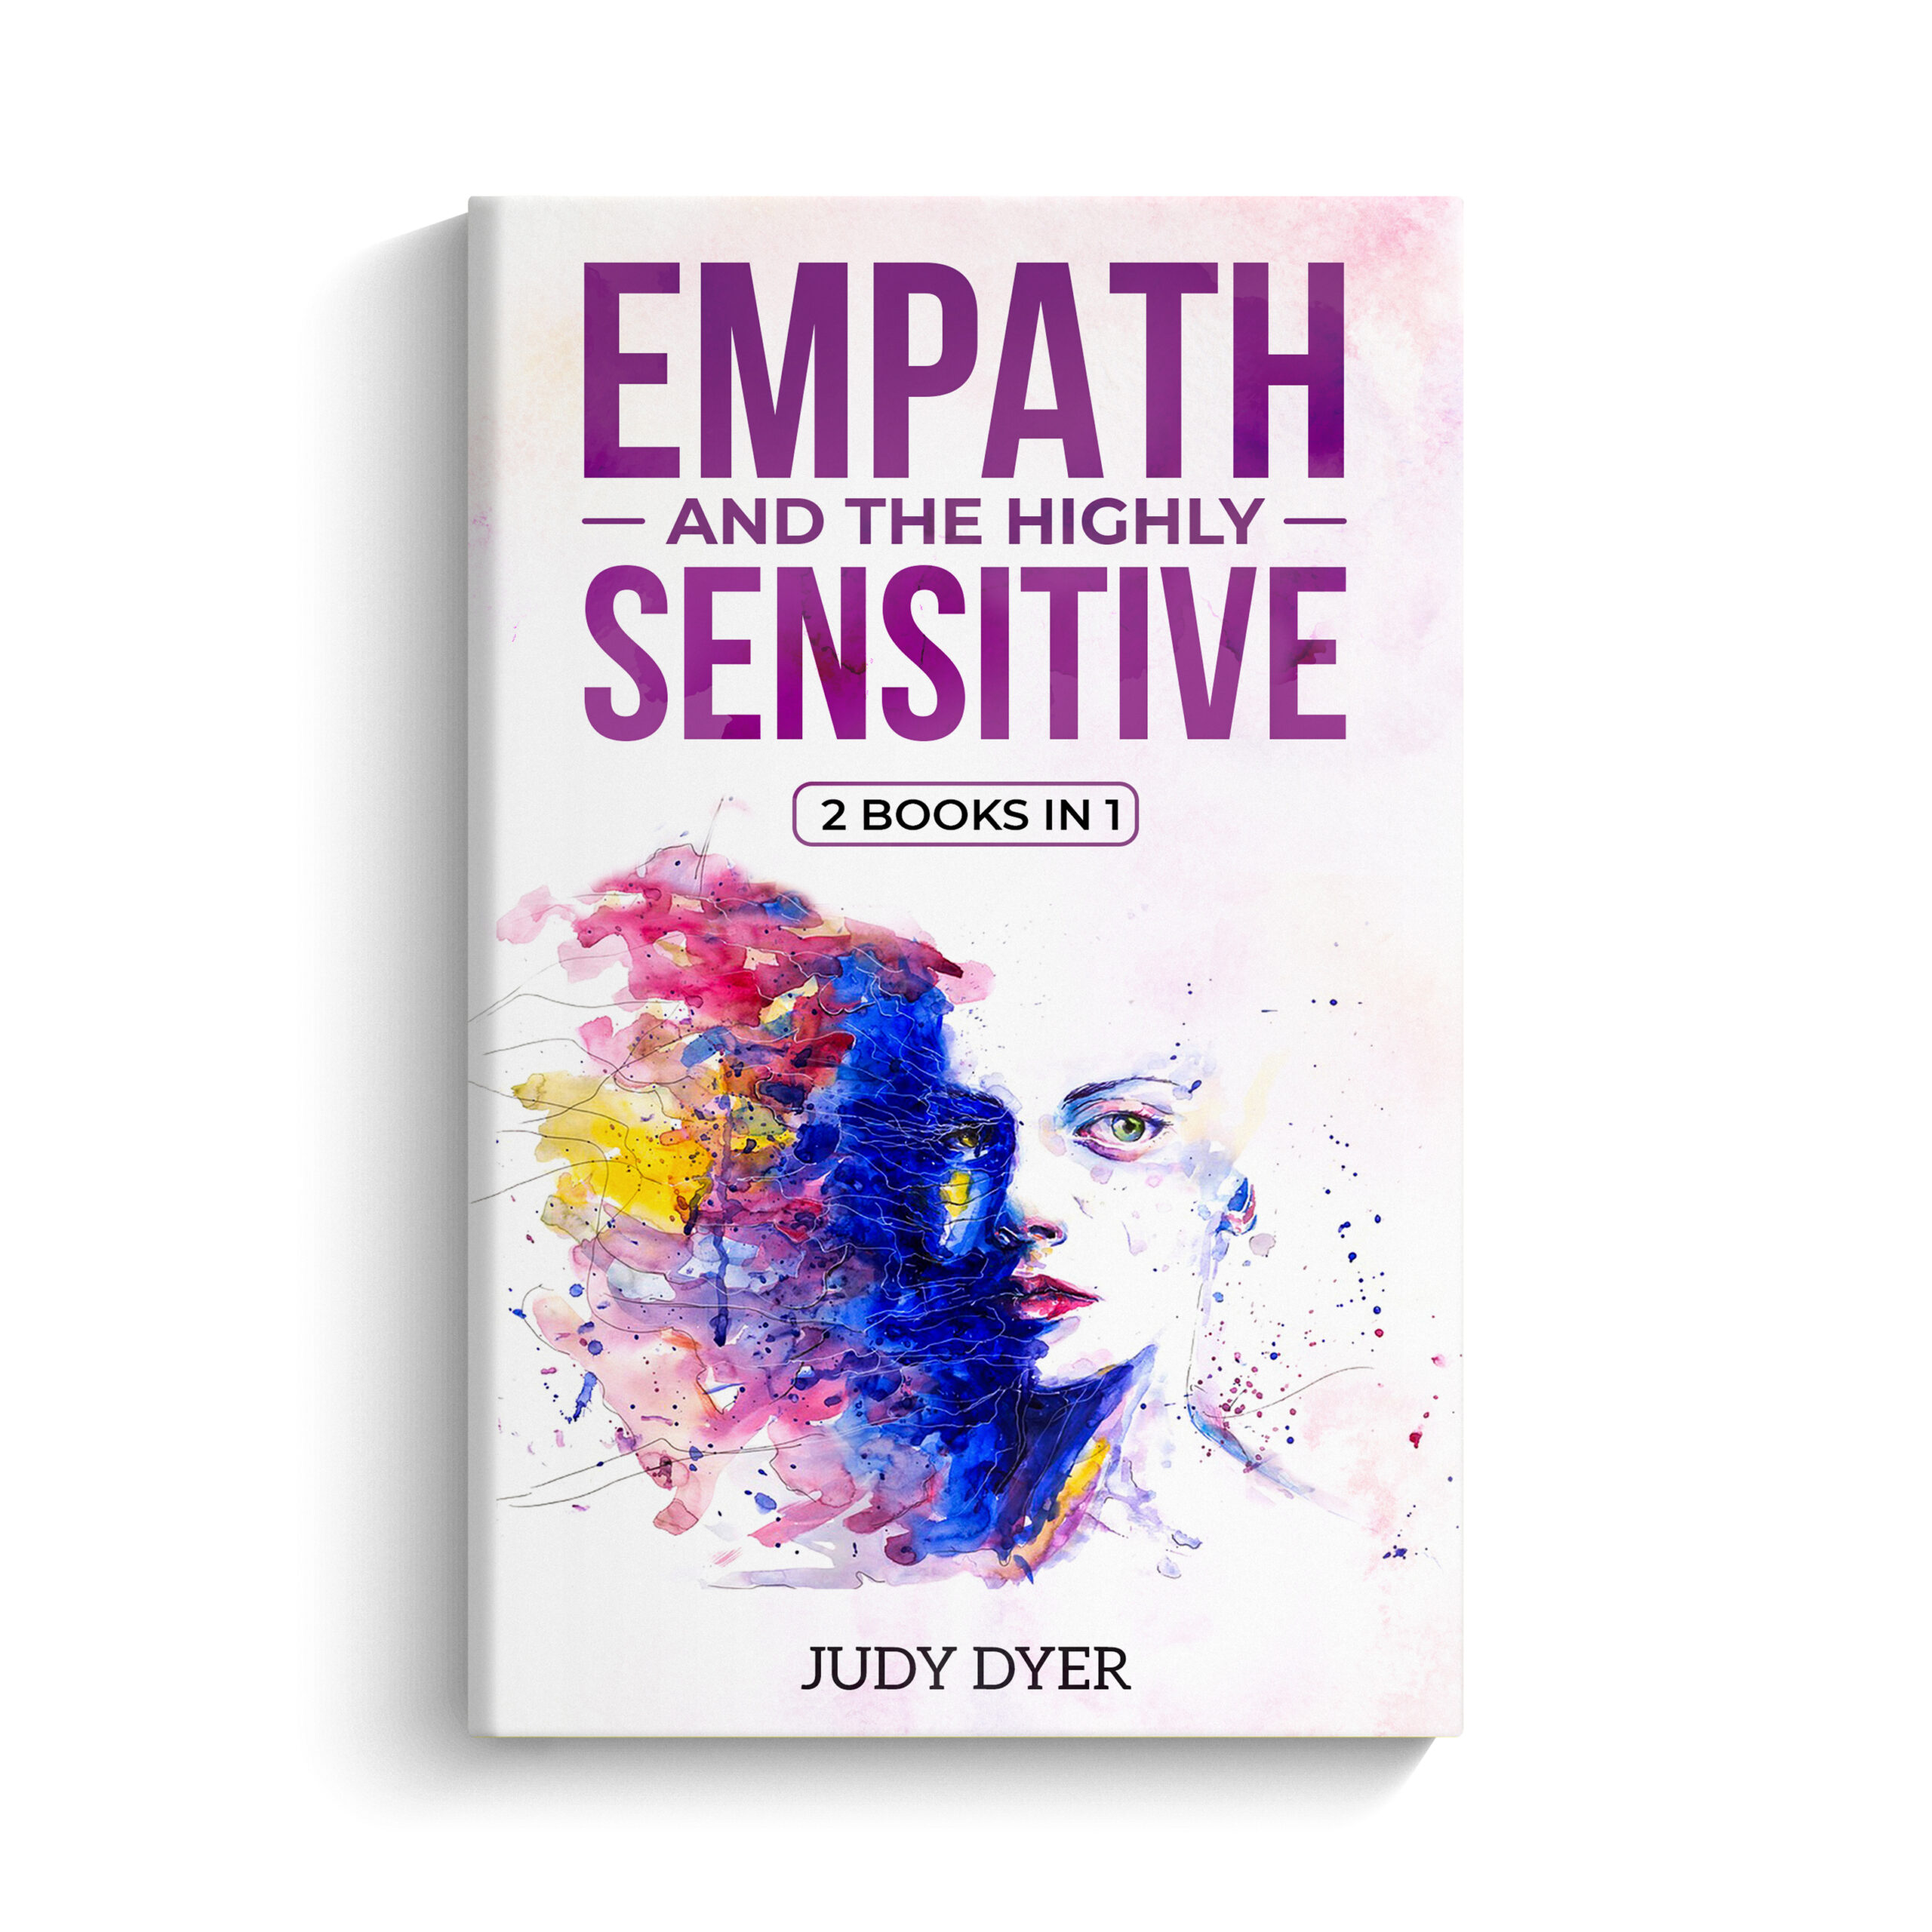 Empath and The Highly Sensitive by Judy Dyer